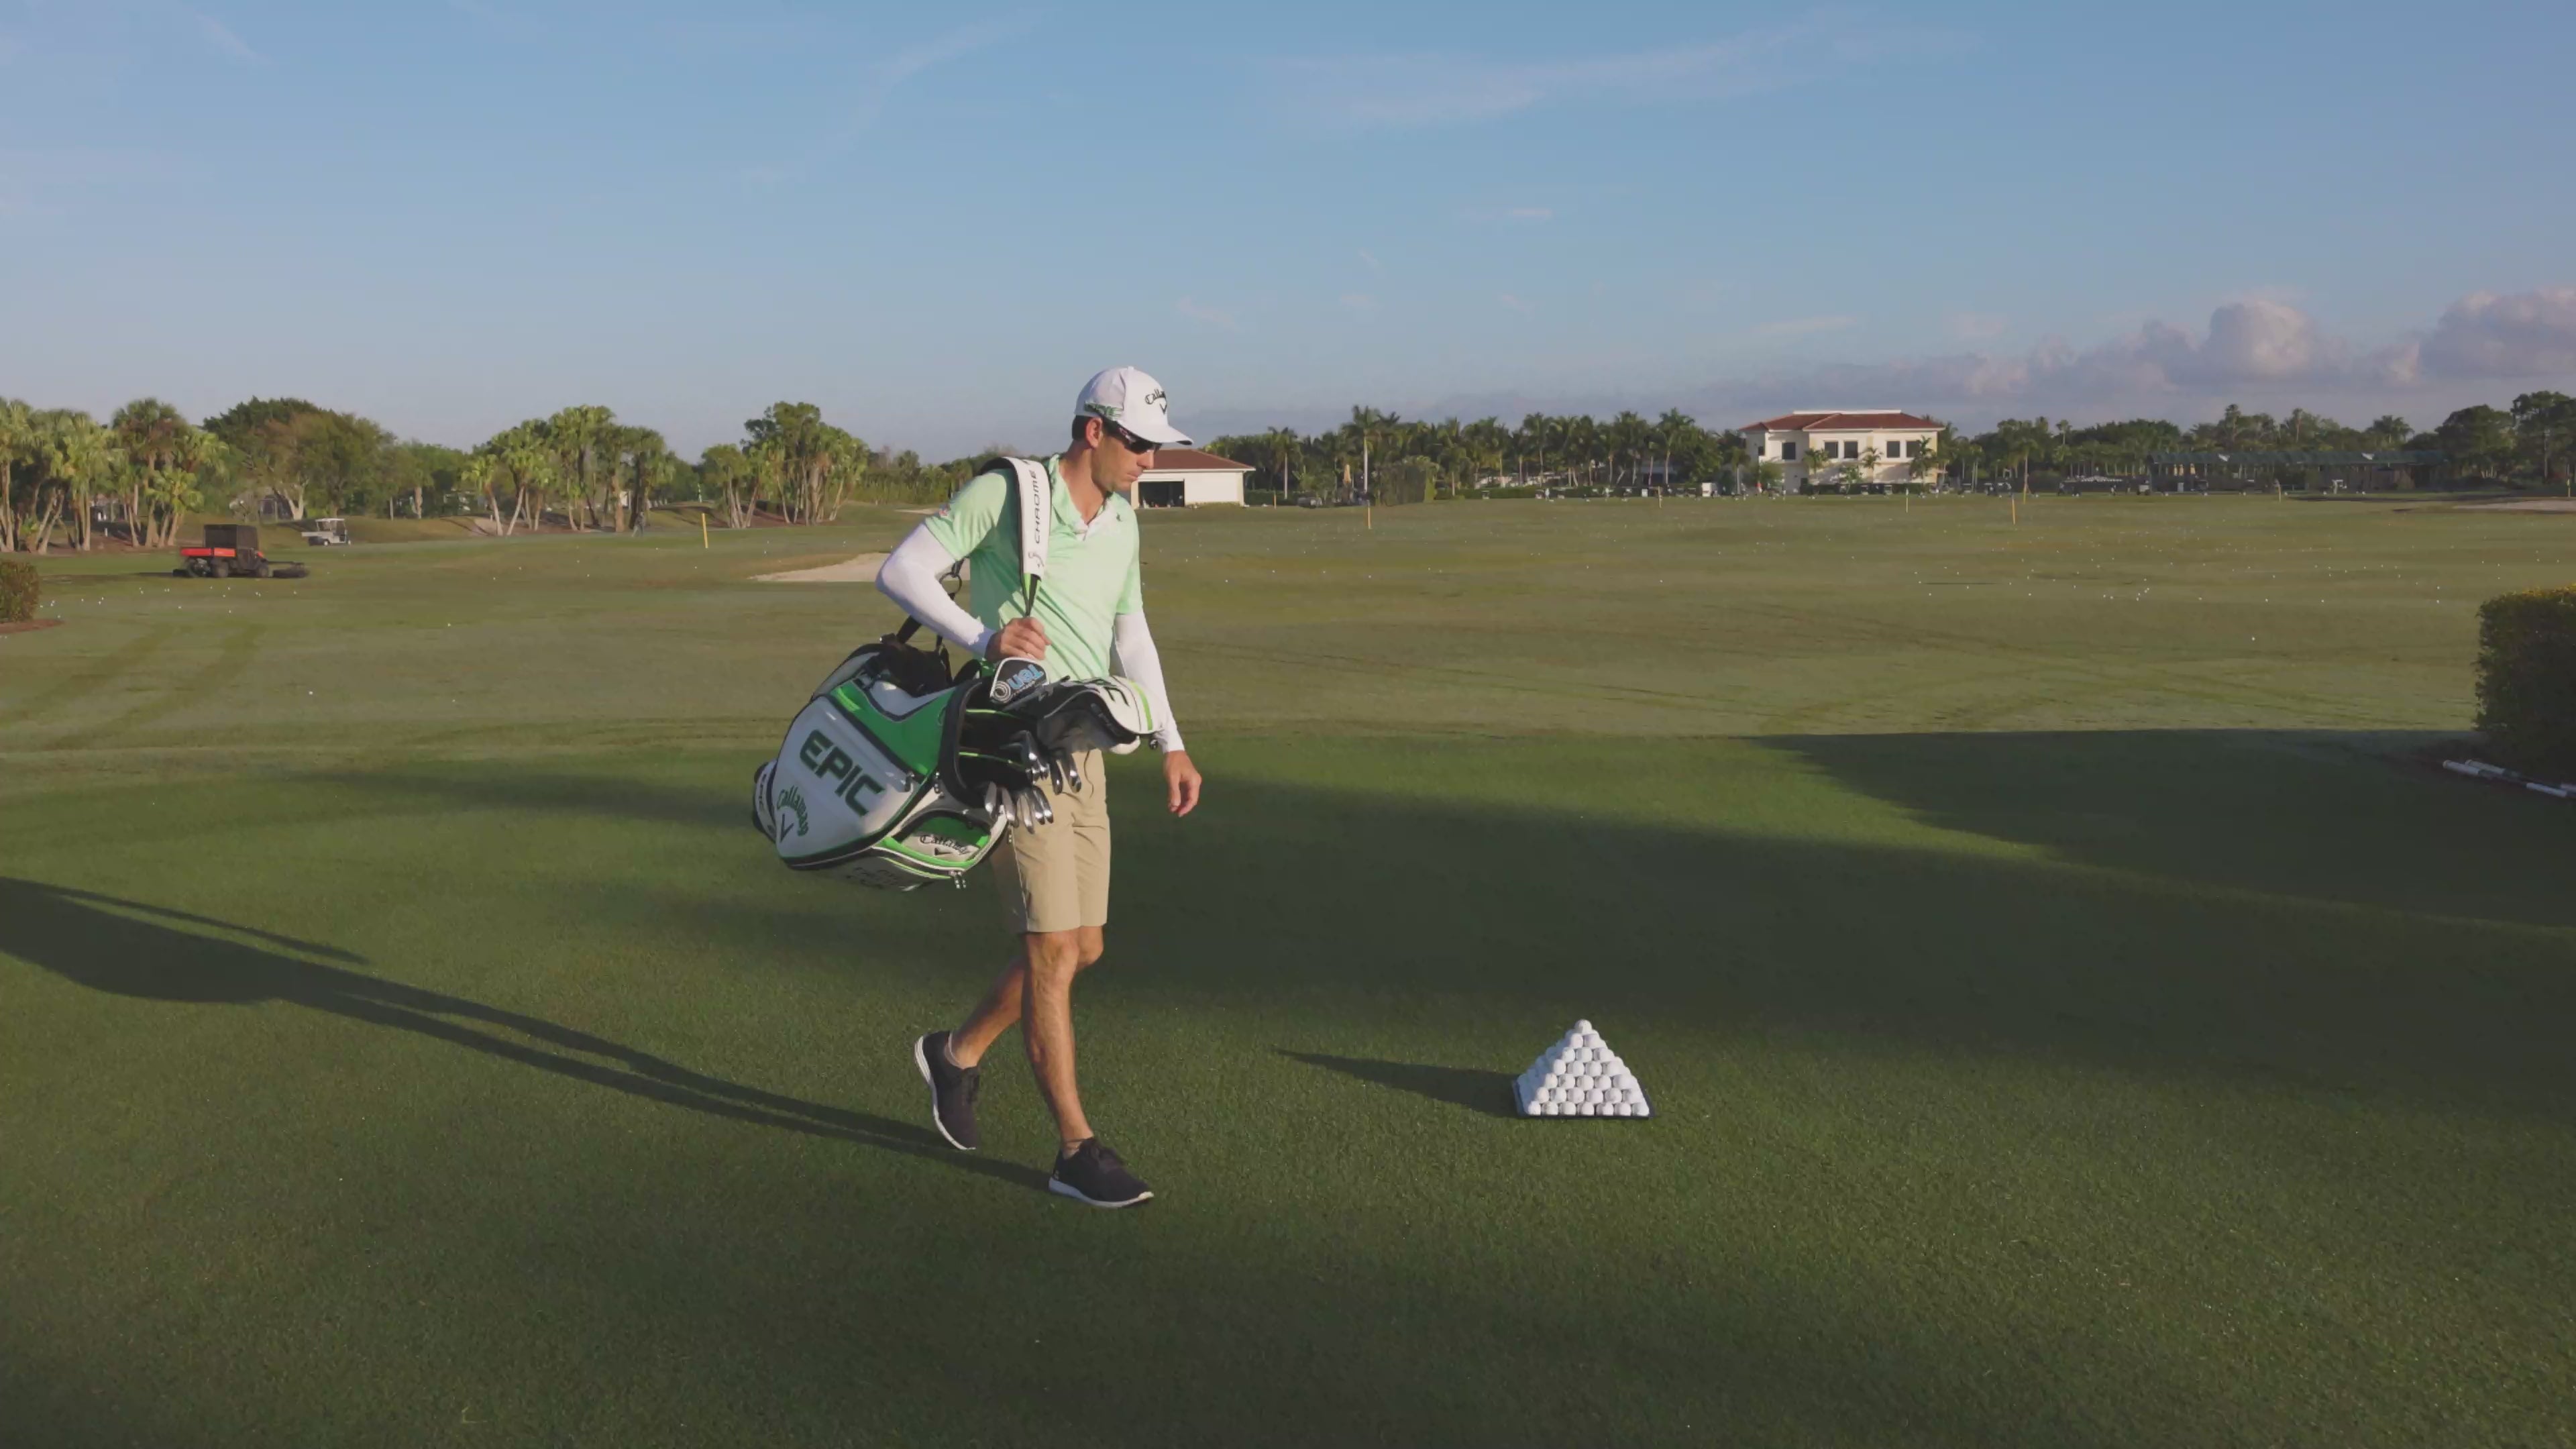 Load video: Video of PGA Pro Dylan Frittelli talking about SParms.